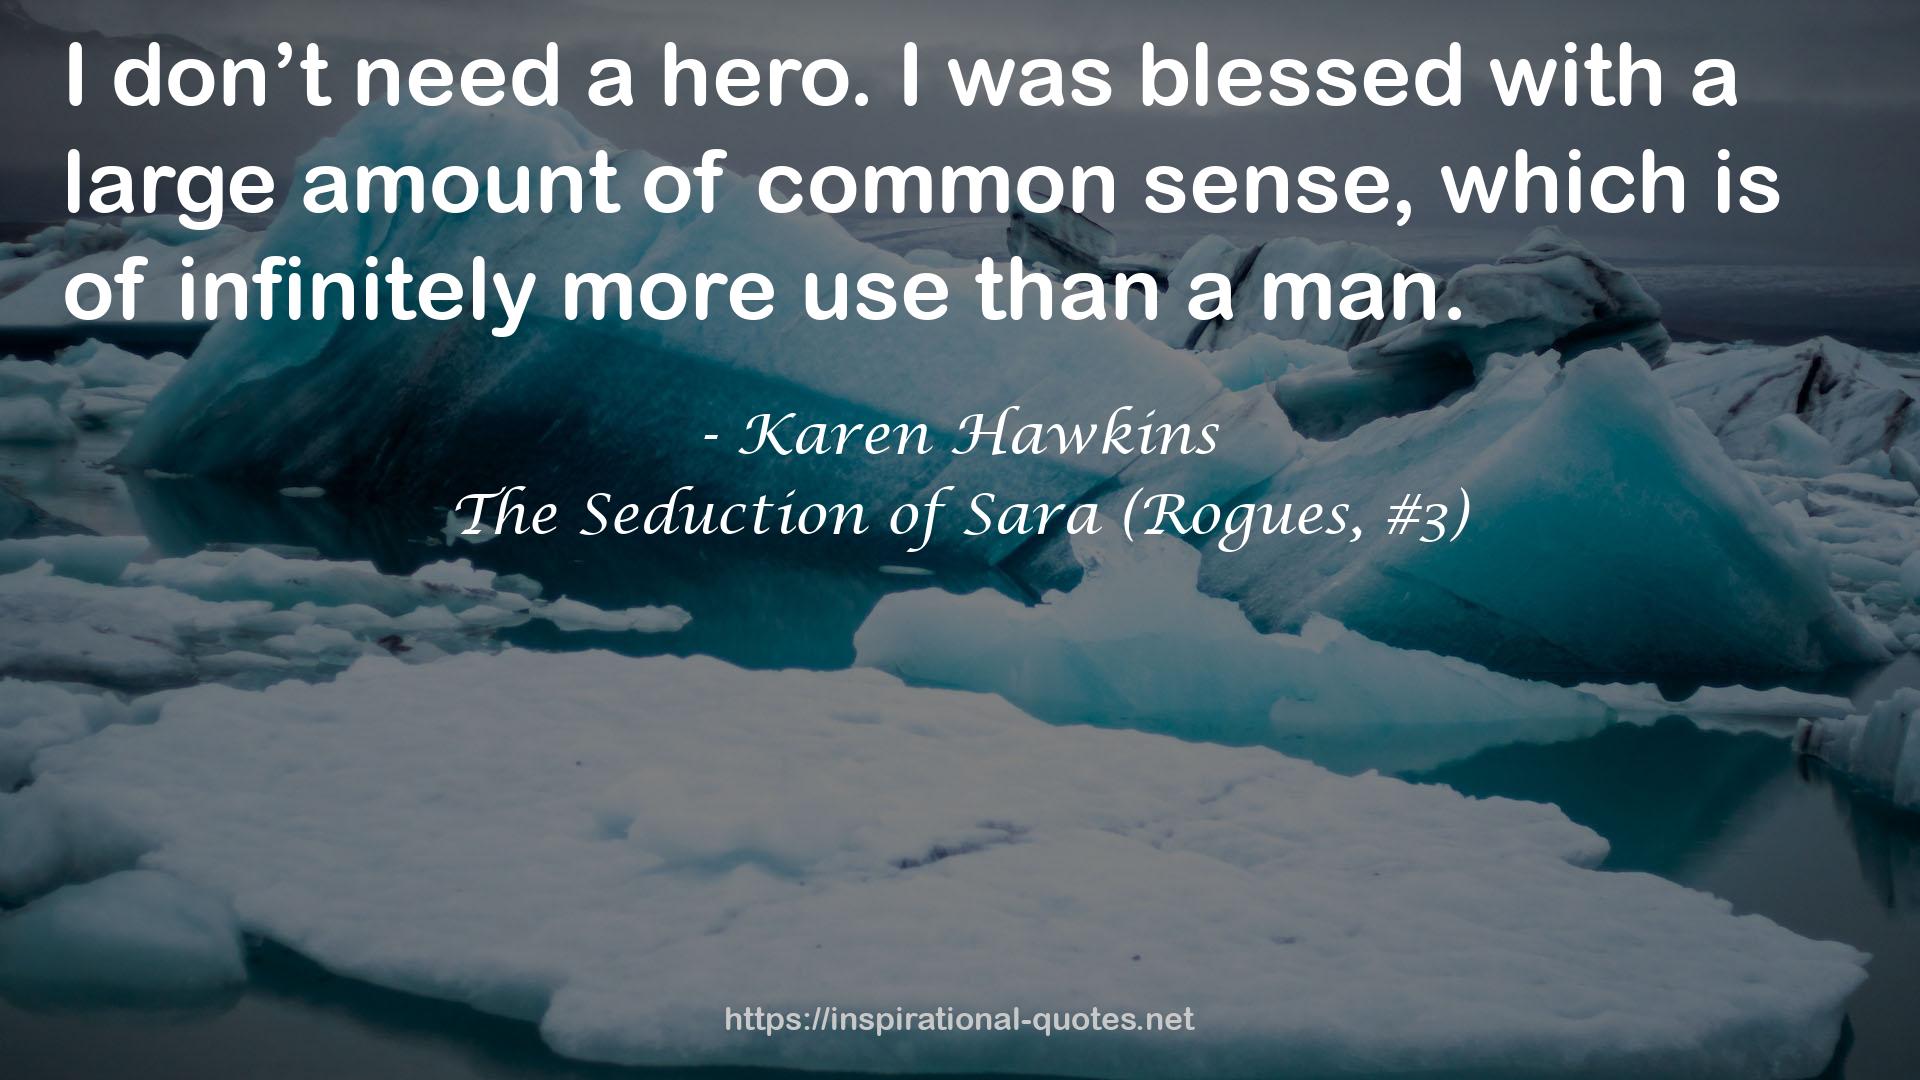 The Seduction of Sara (Rogues, #3) QUOTES